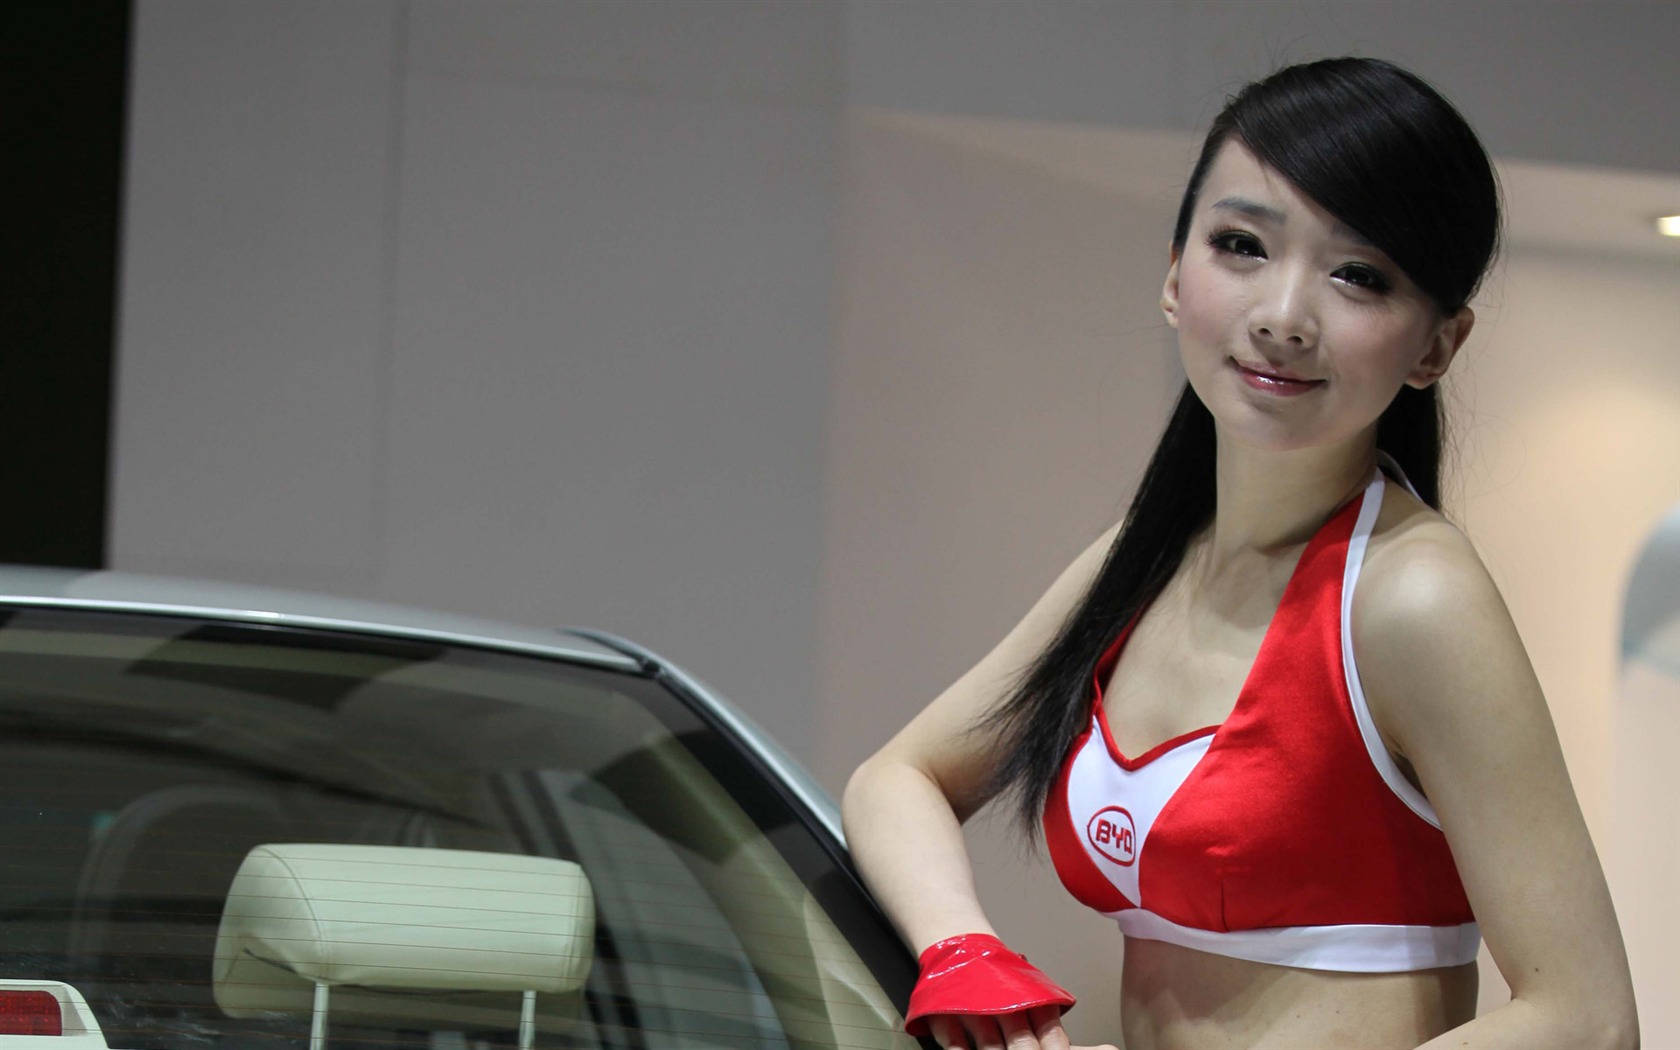 2010 Beijing International Auto Show beauty (1) (the wind chasing the clouds works) #20 - 1680x1050